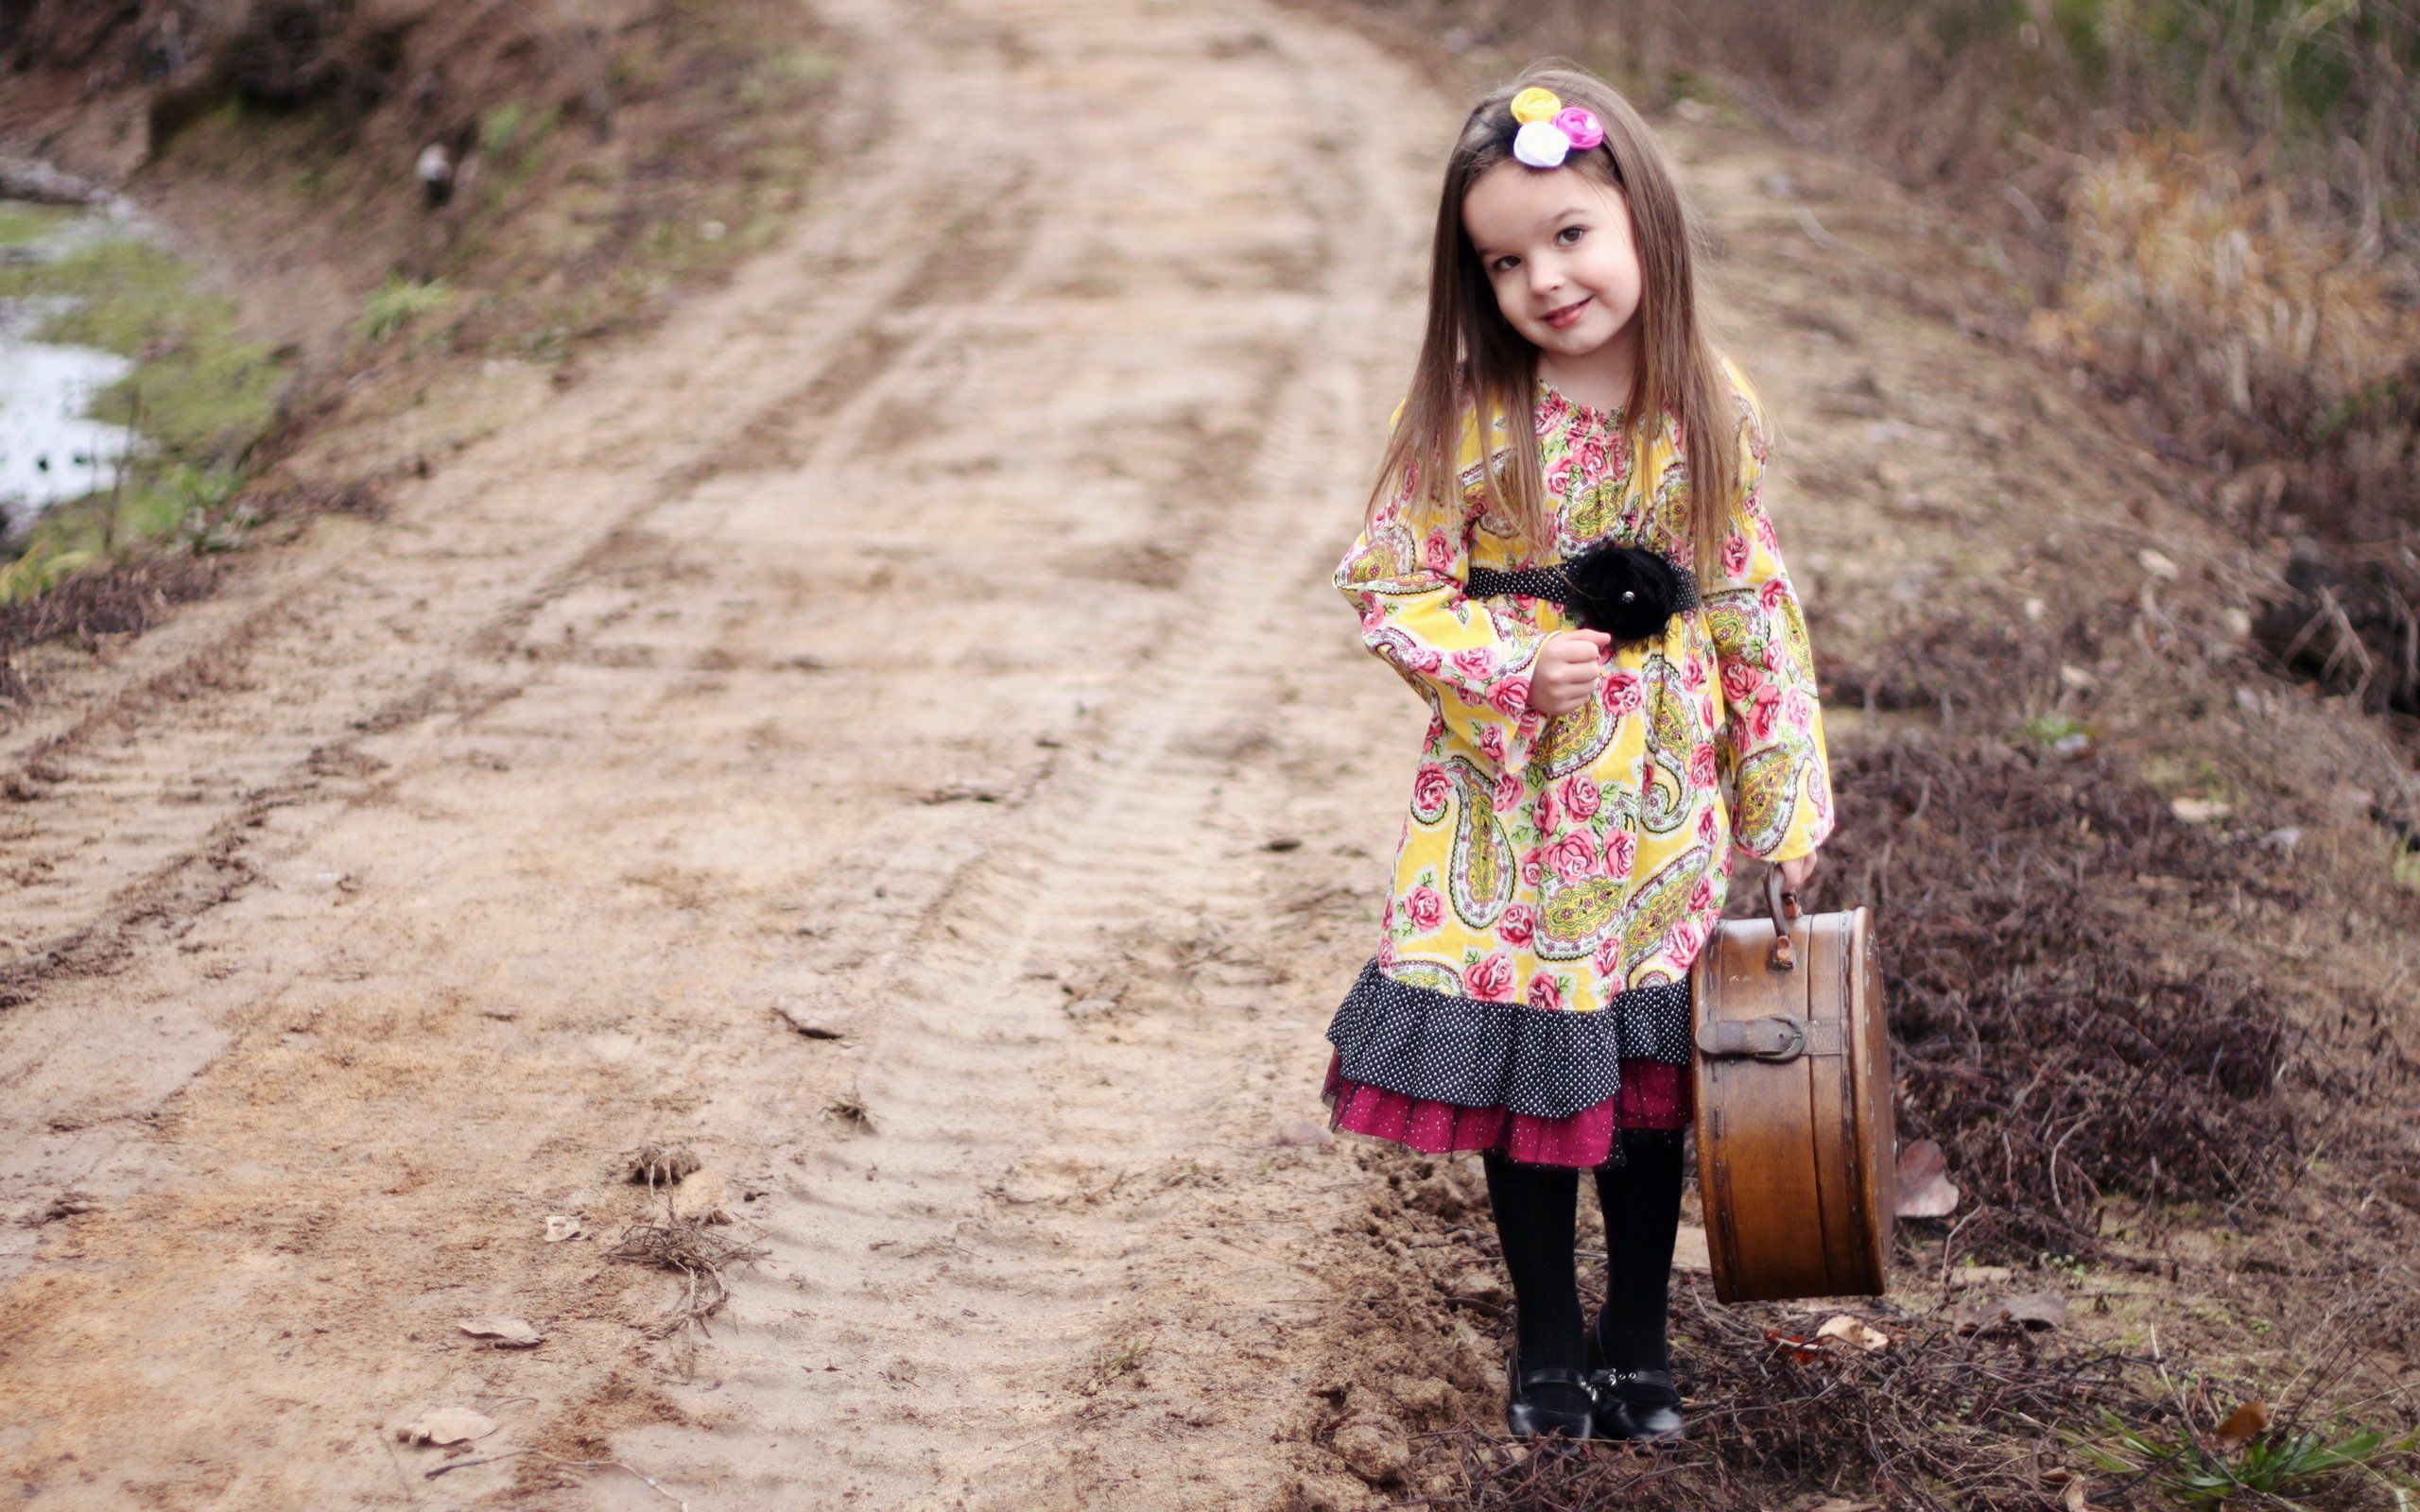 girl, A, Suitcase, The, Road, The, Mood, Cute, Child, Children, Travel Wall...